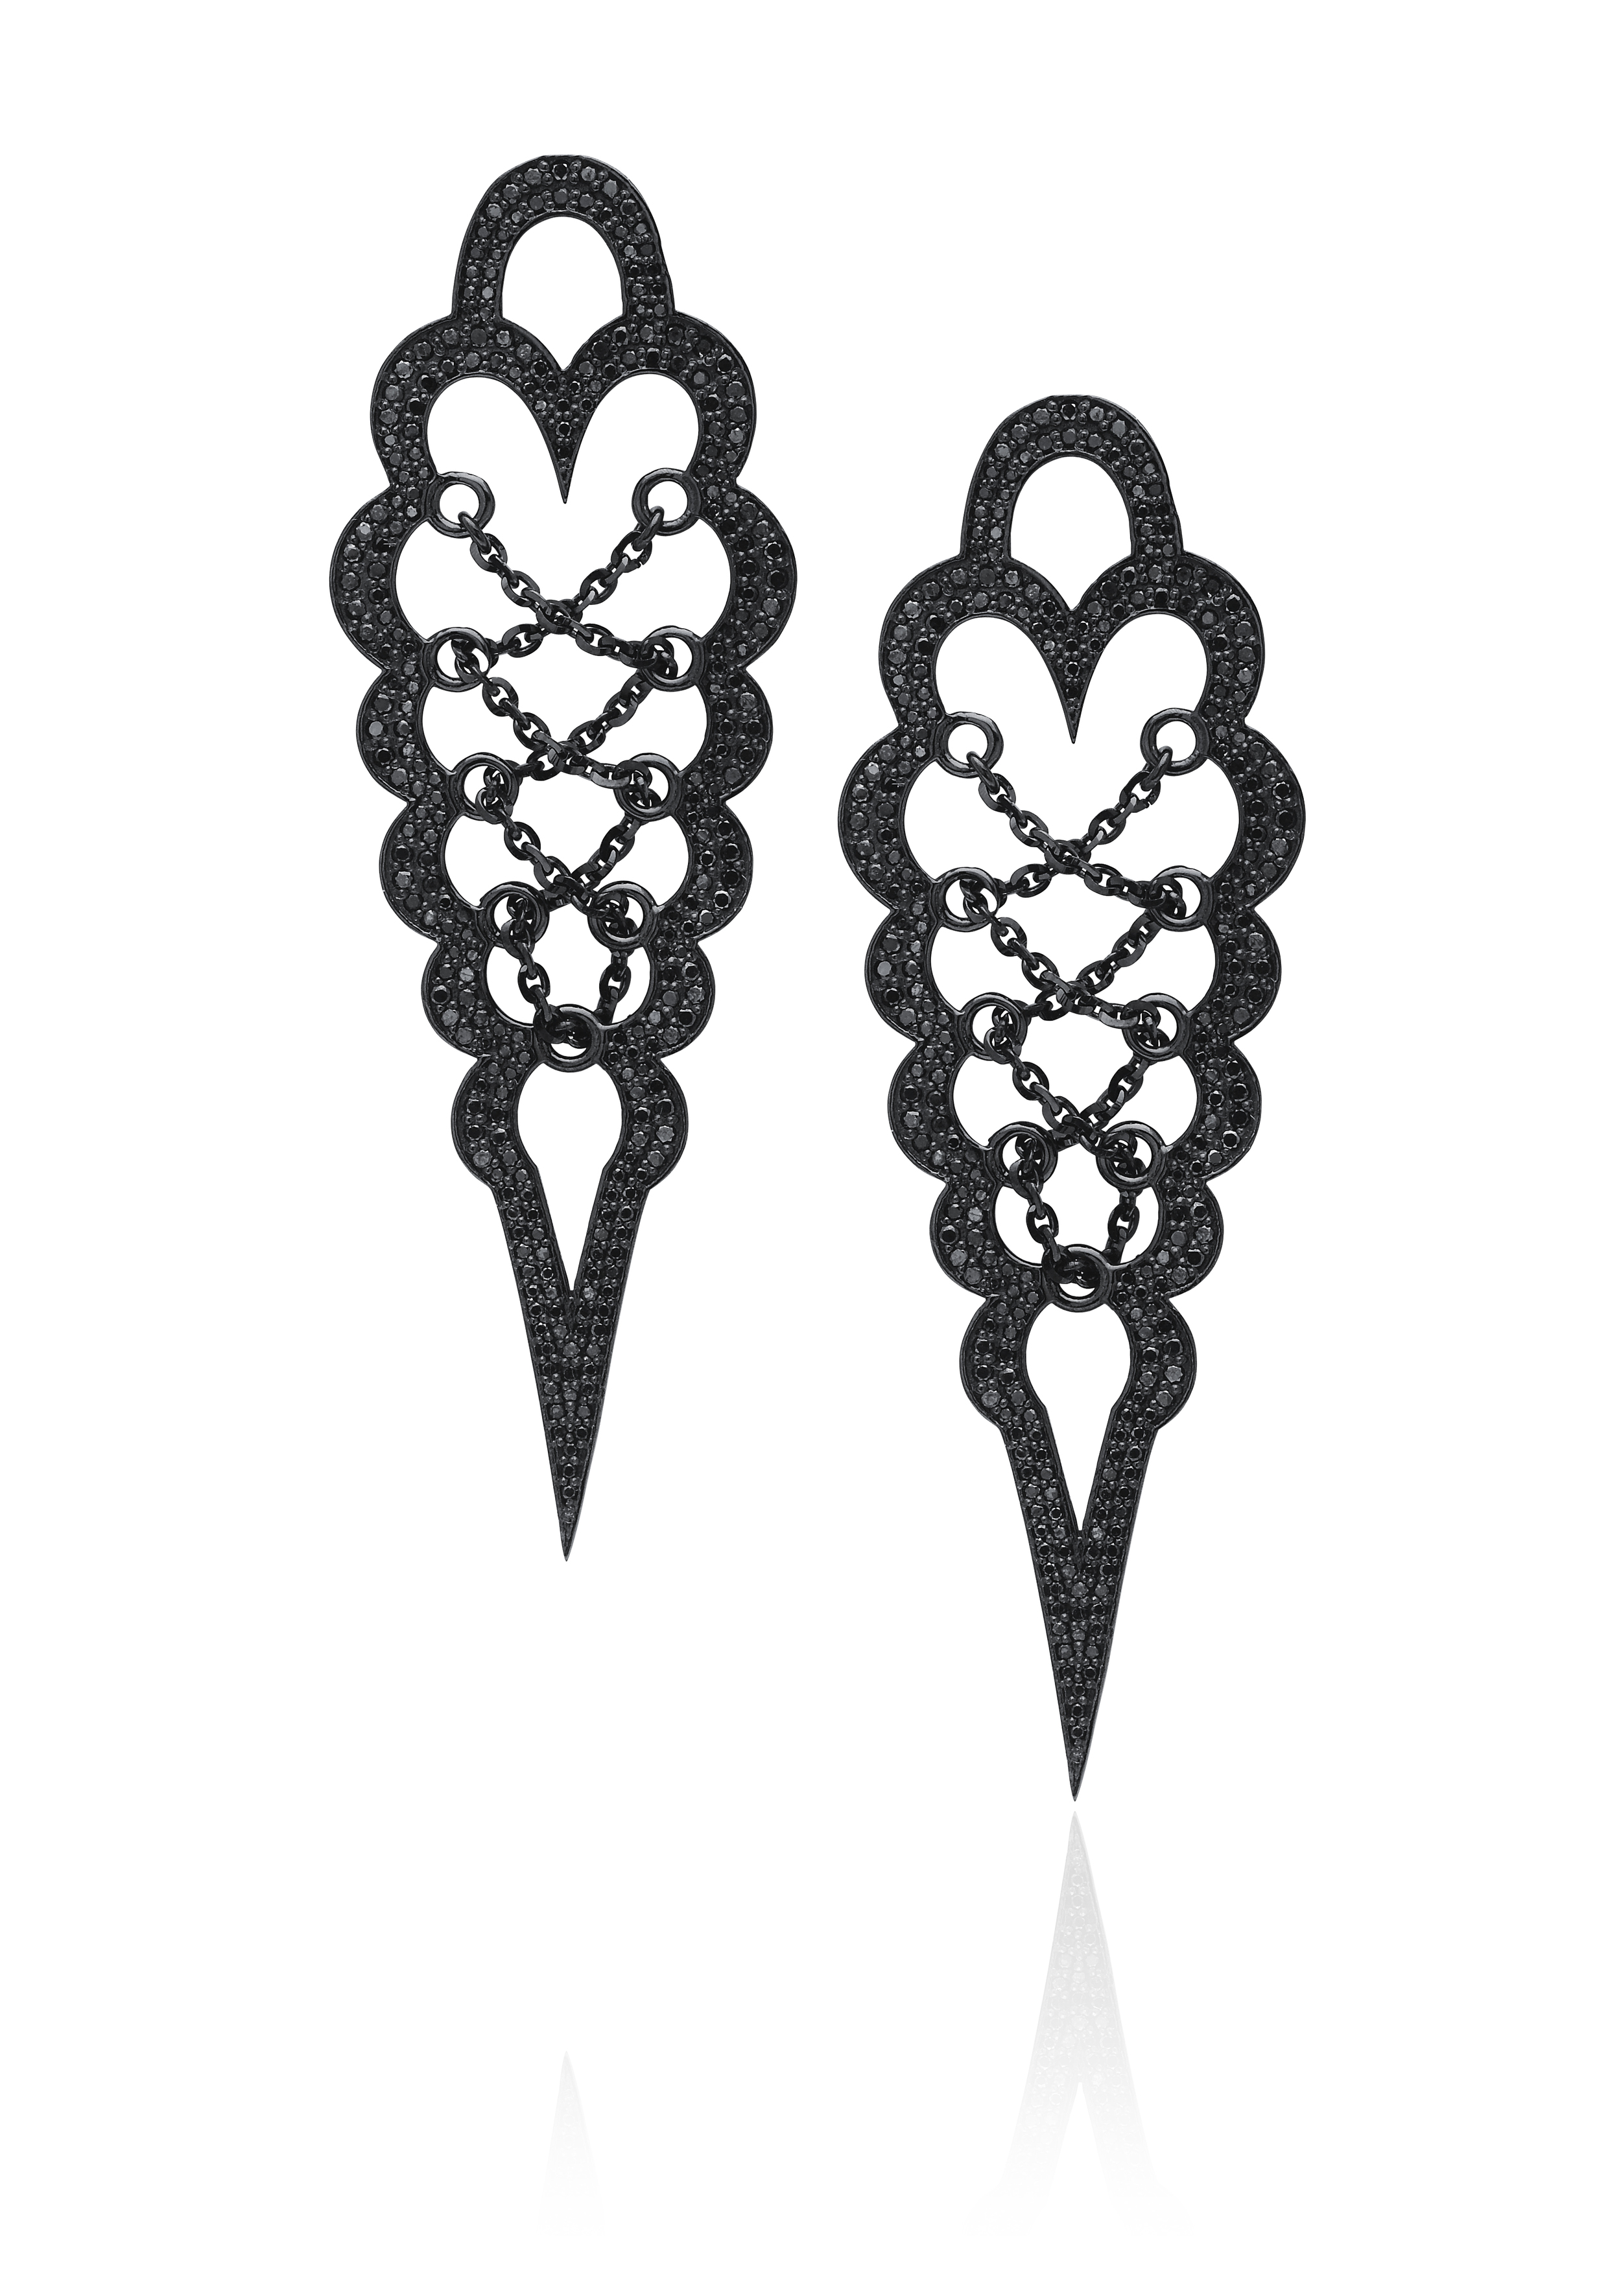  Brand new black diamond corset earrings from the "Entwined with You" collection. 